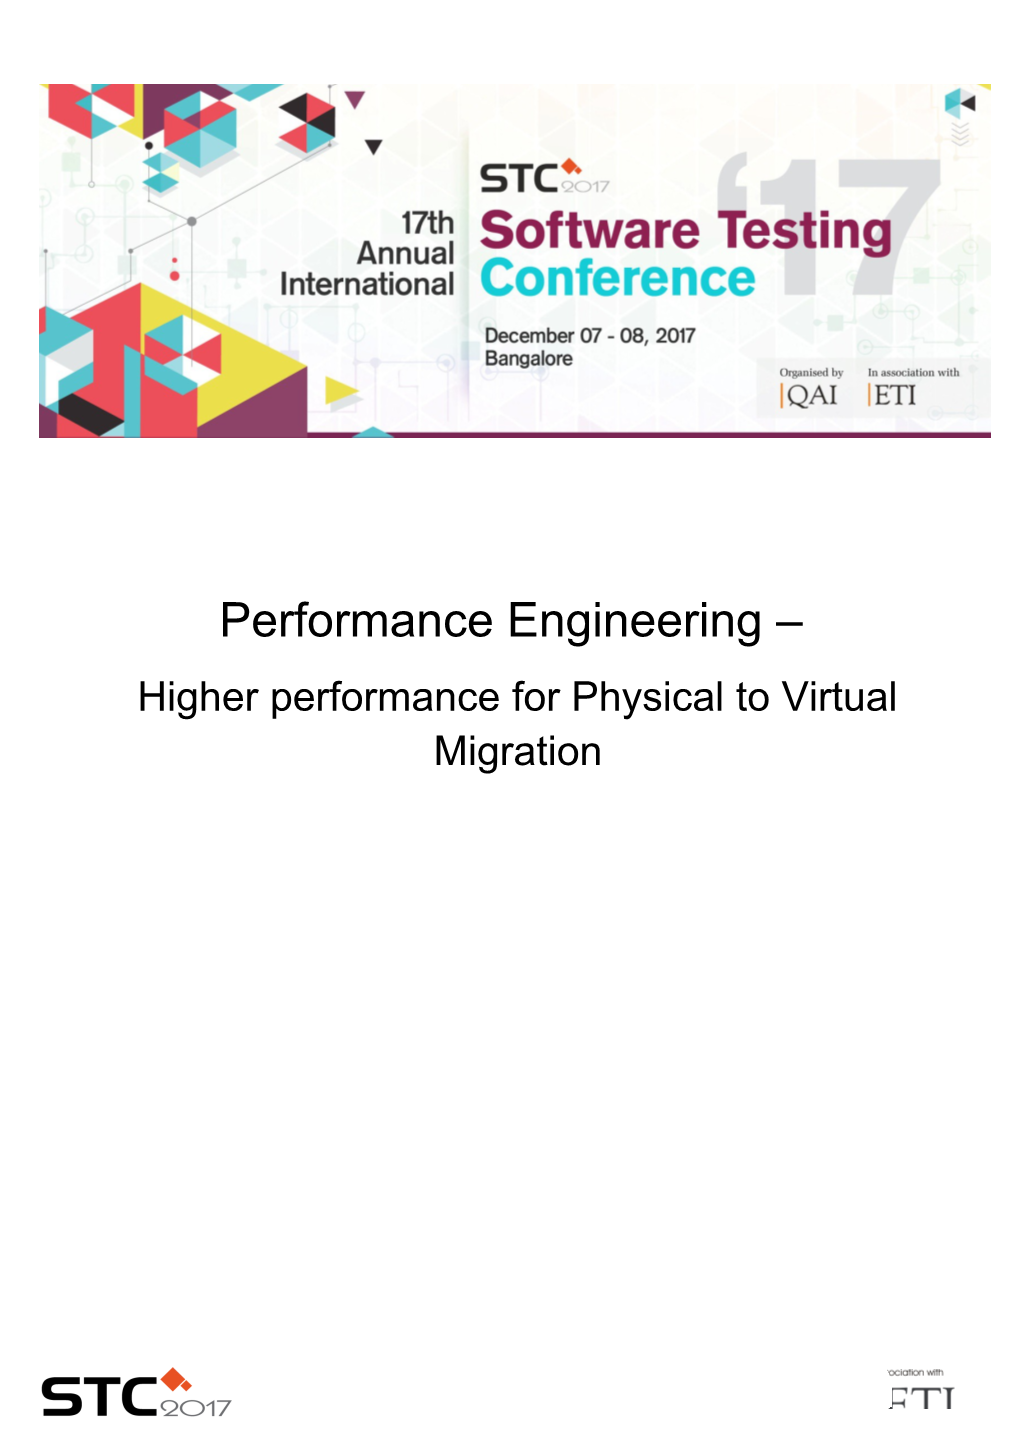 Higher Performance for Physical to Virtual Migration